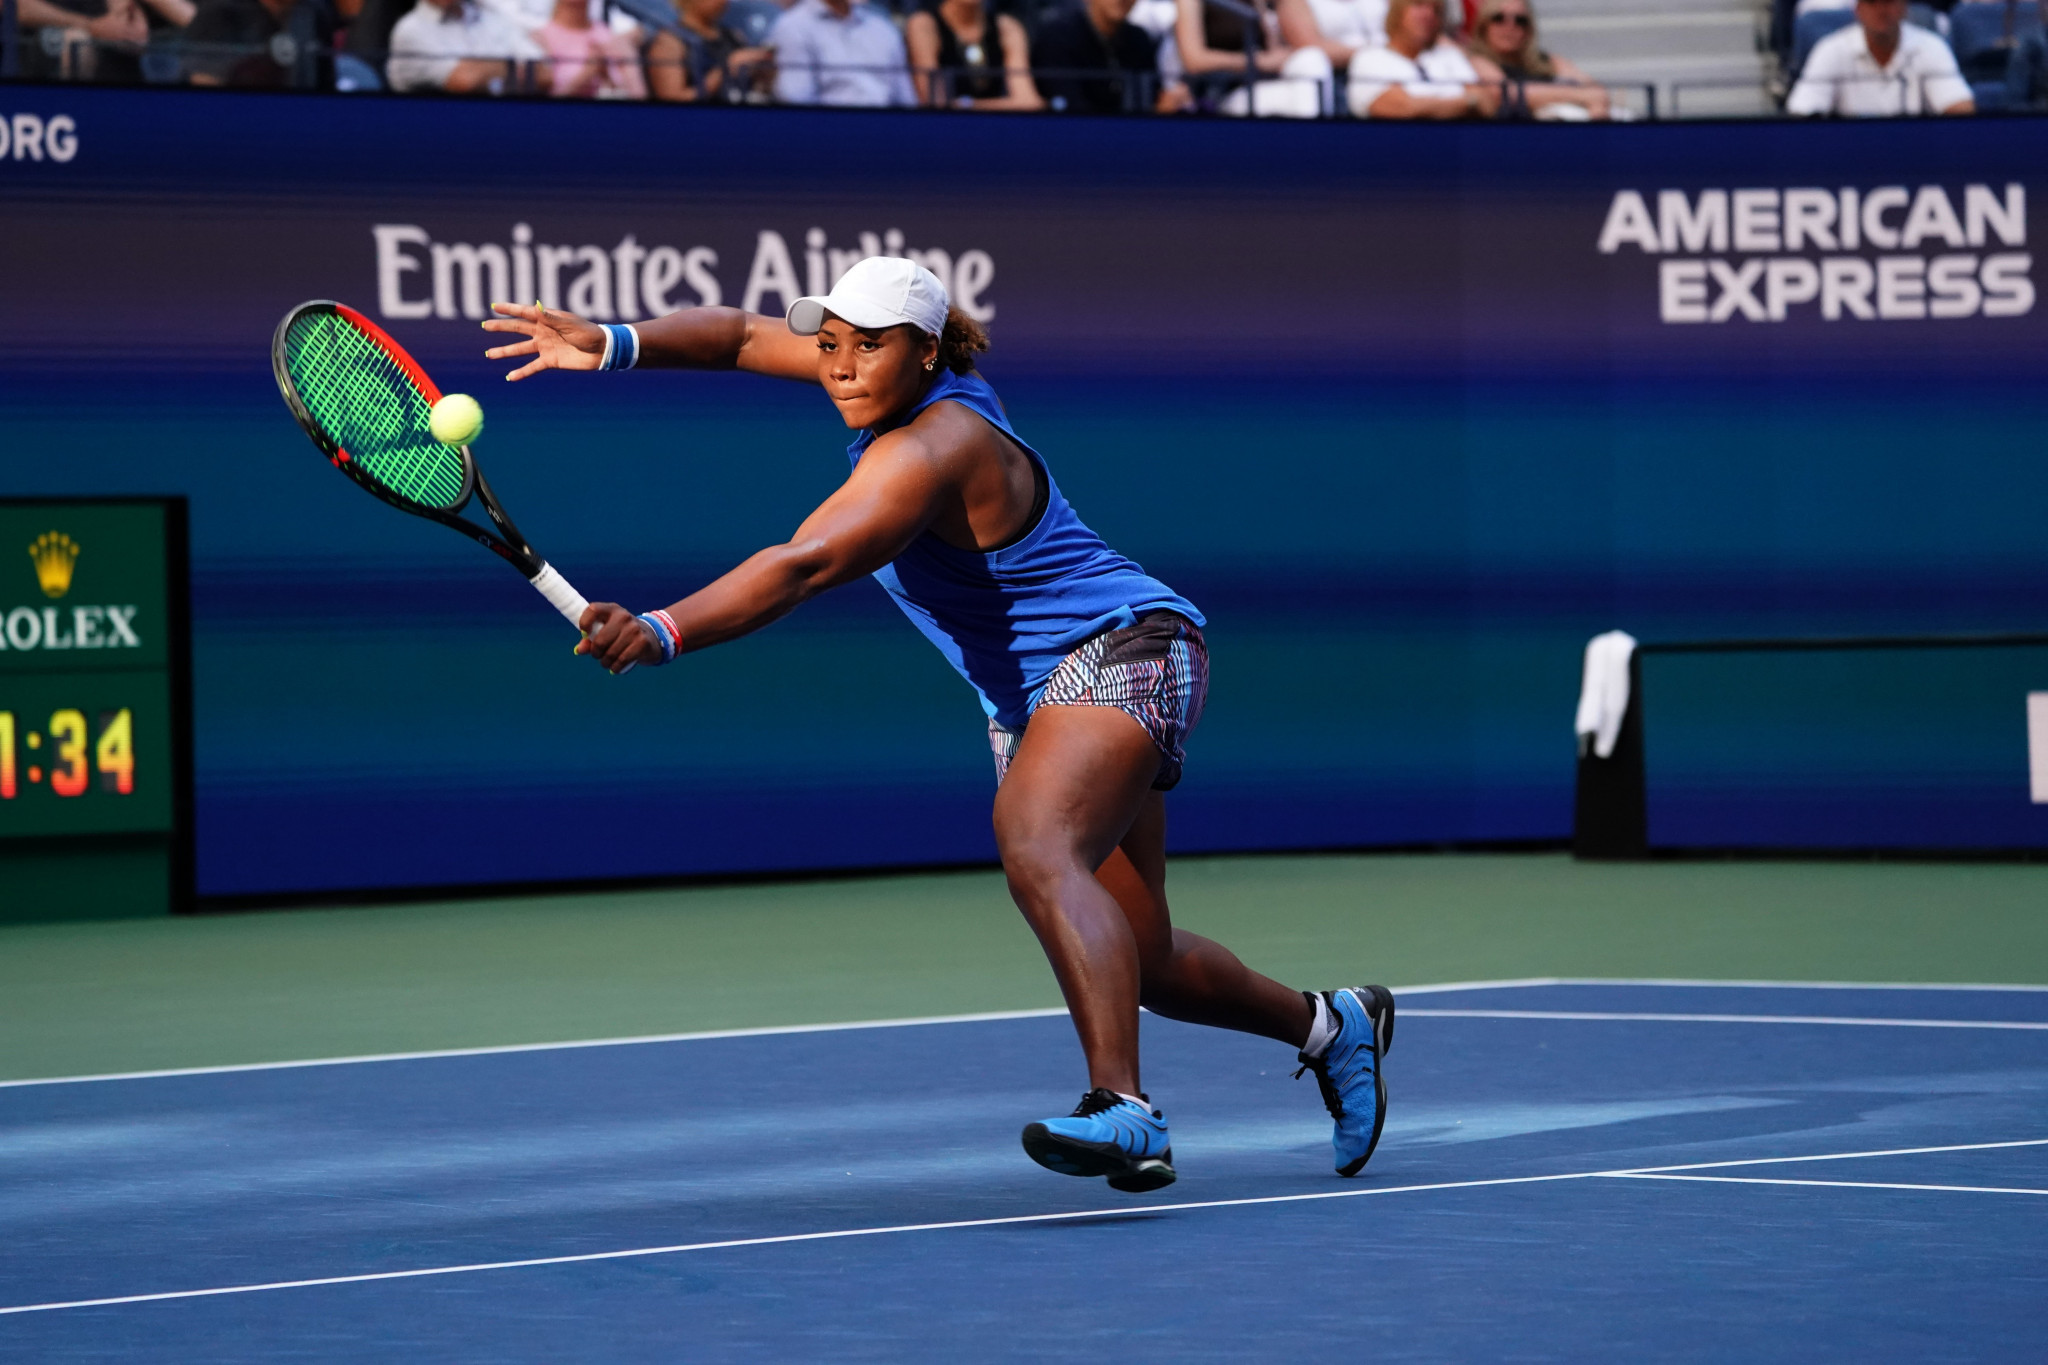 Taylor Townsend beat Simona Halep in three sets at the US Open ©Getty Images